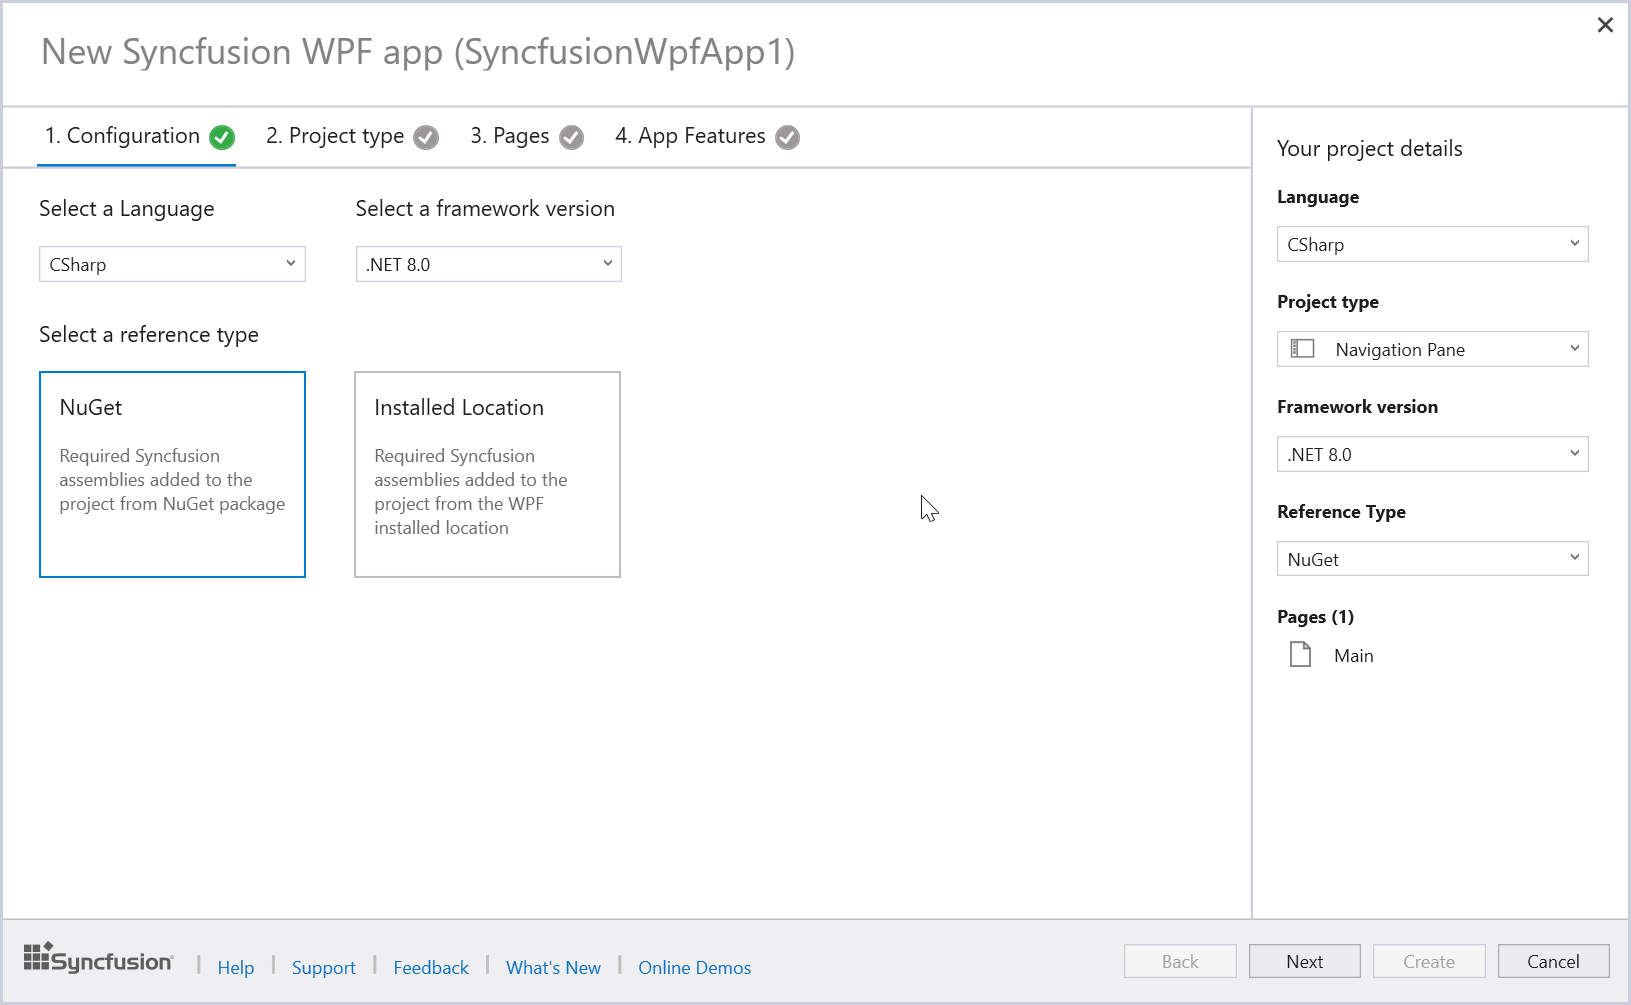 Syncfusion WPF project configuration wizard